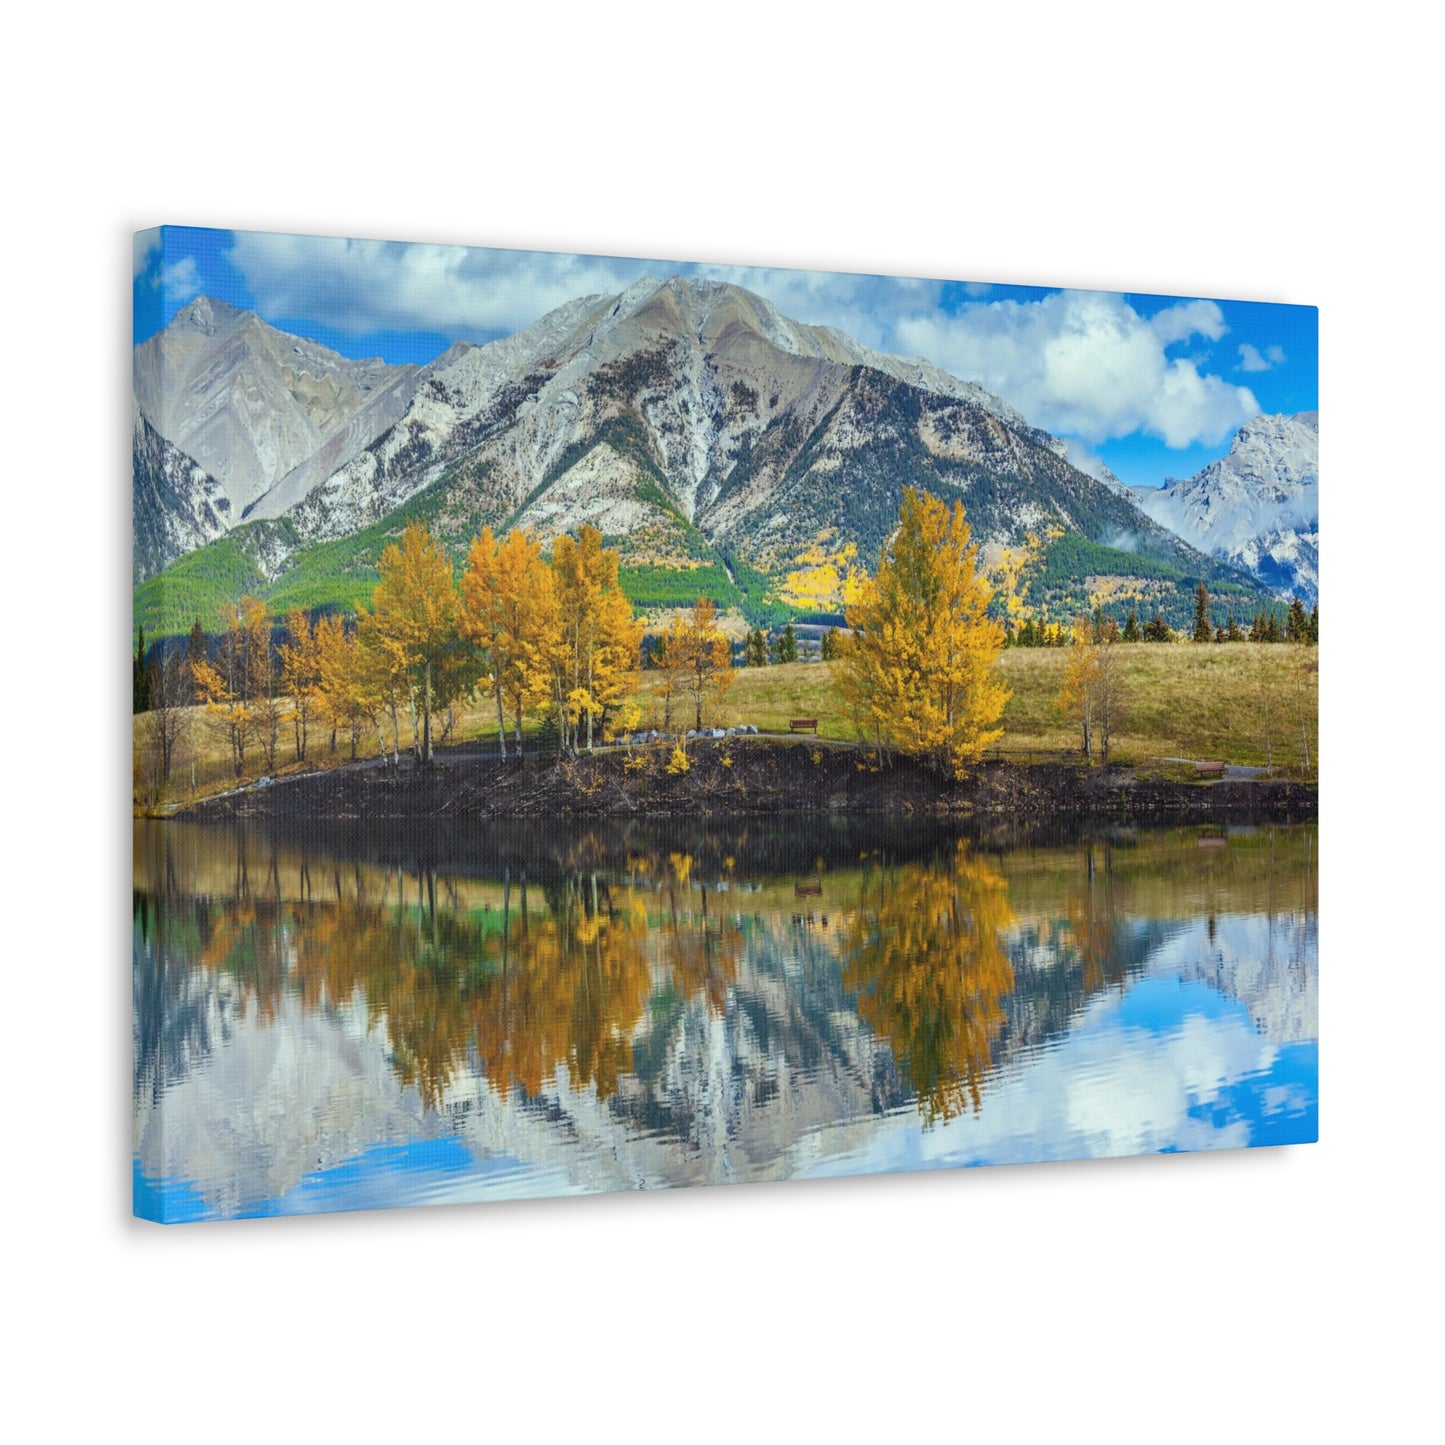 Three Sisters Canmore, Alberta in the Fall Canvas Gallery Wraps